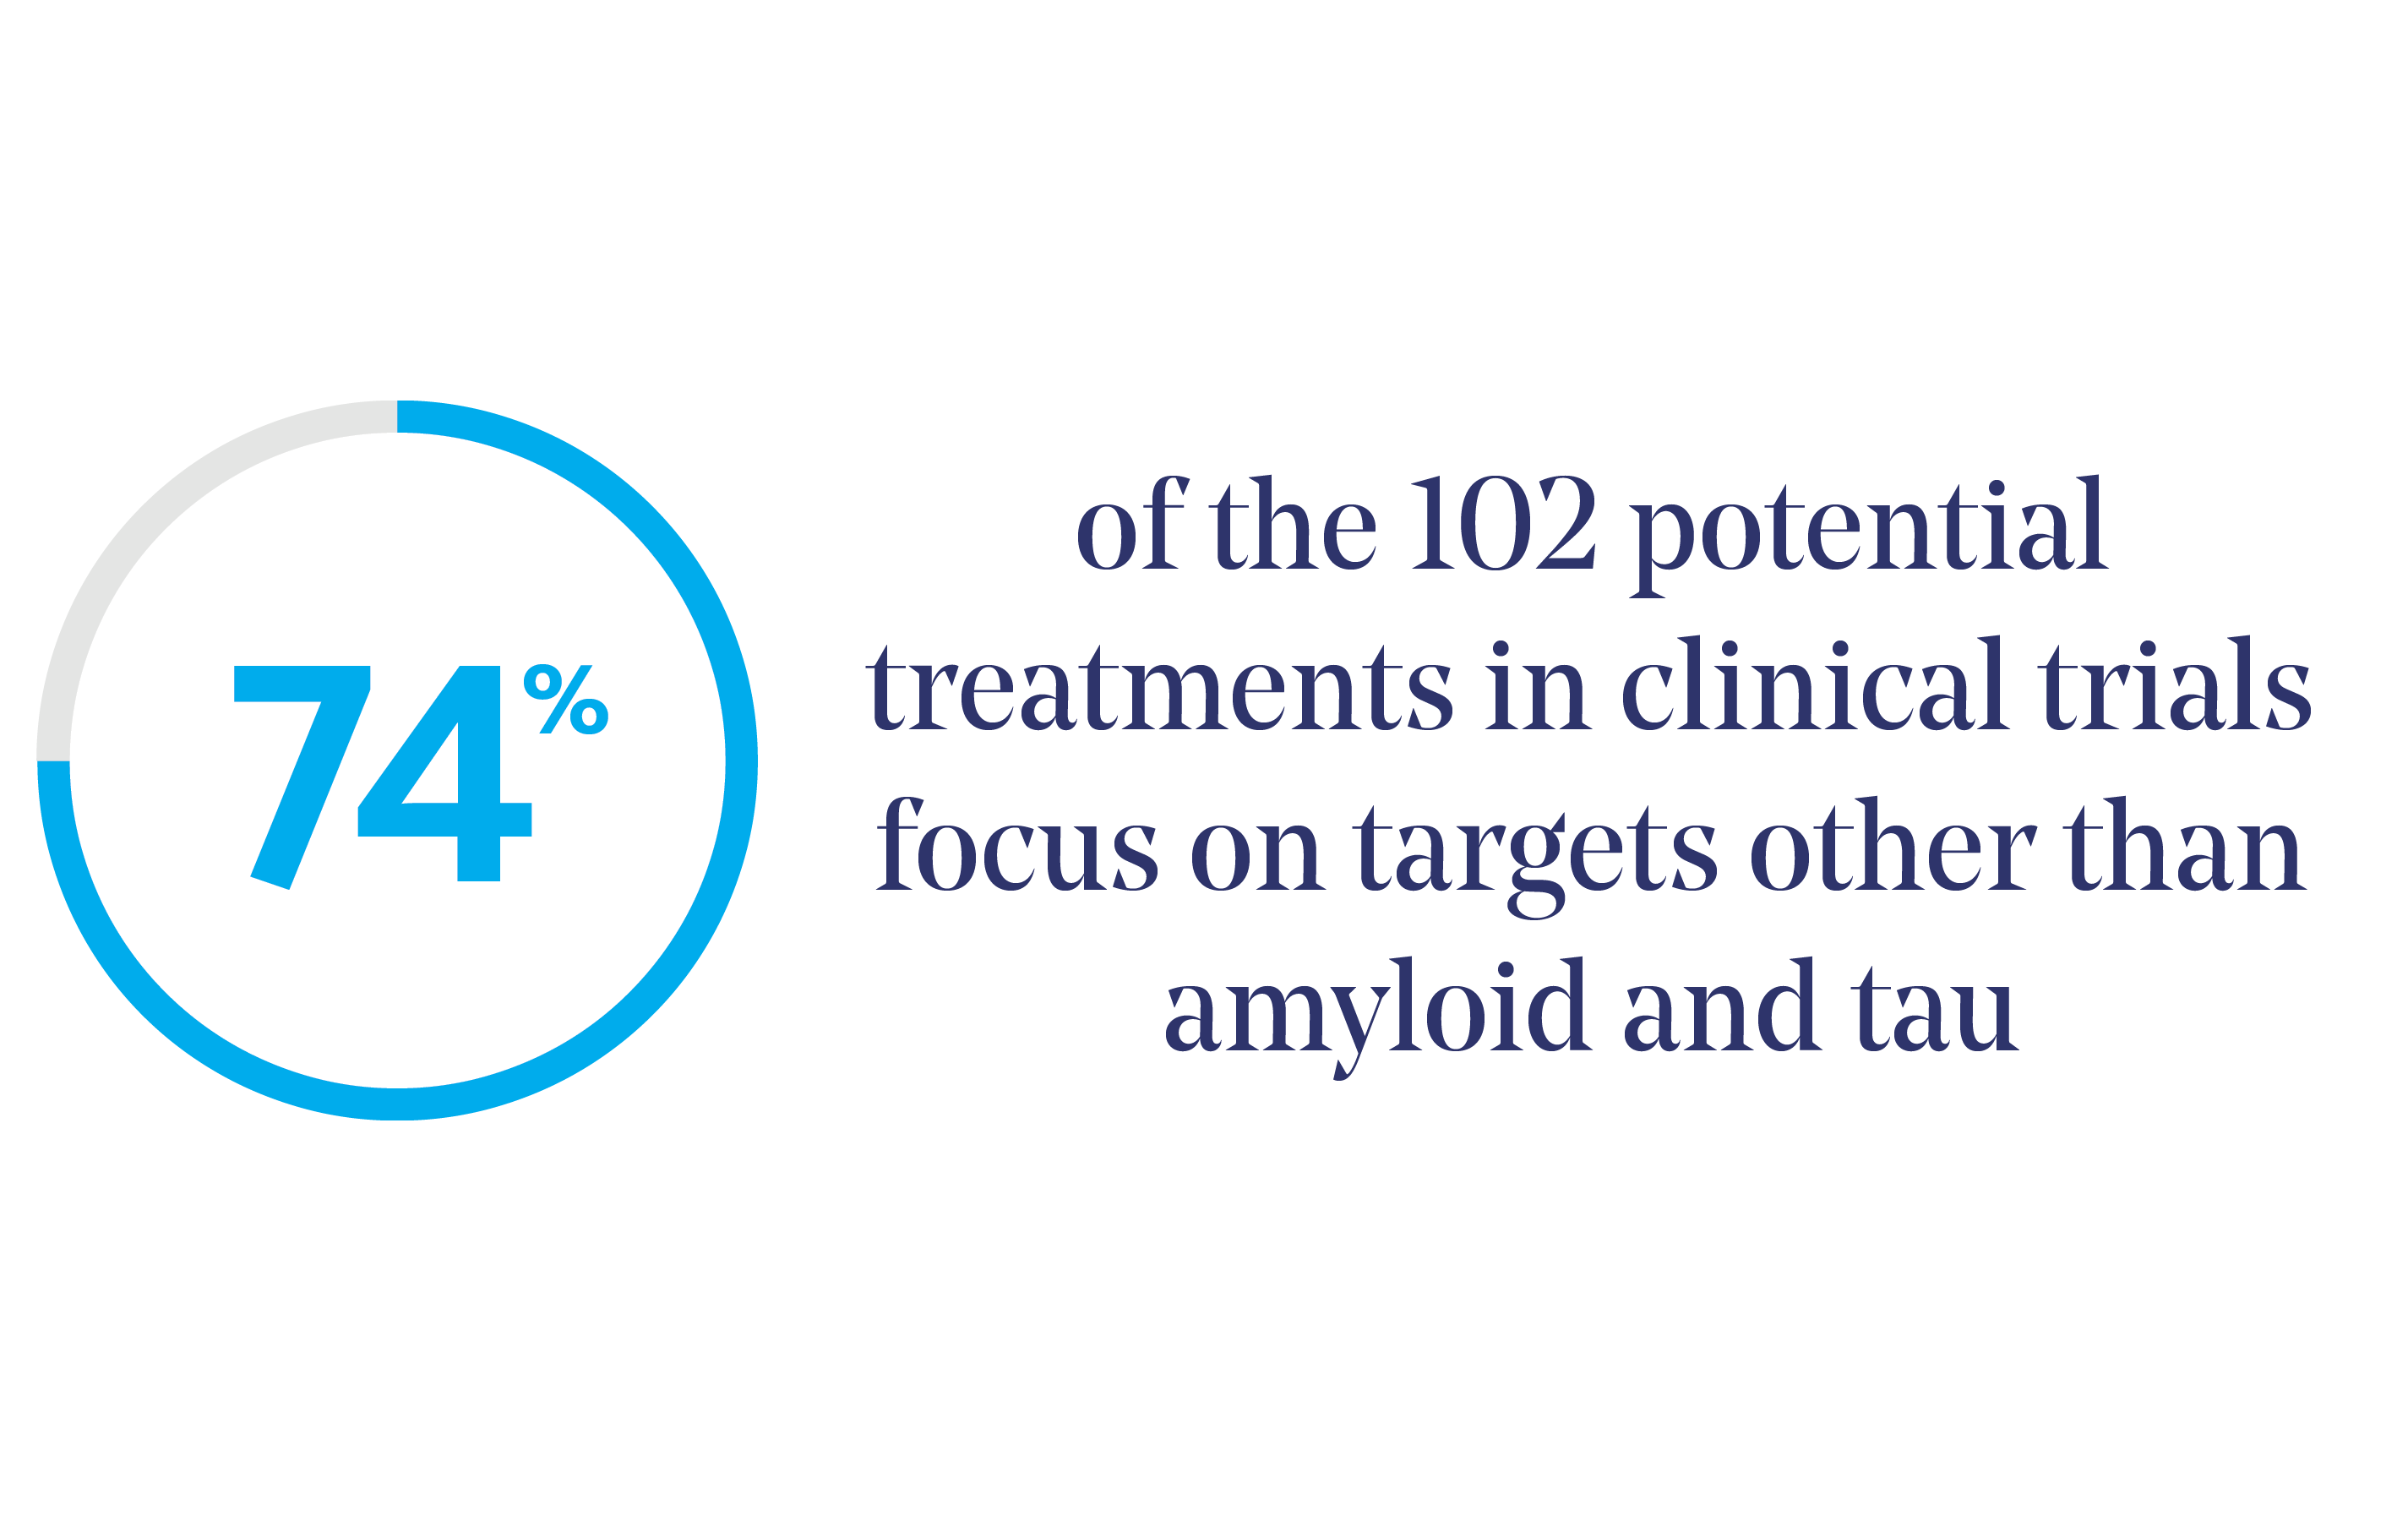 74% of the 102 potential treatments in clinical trials focus on targets other than amyloid and tau